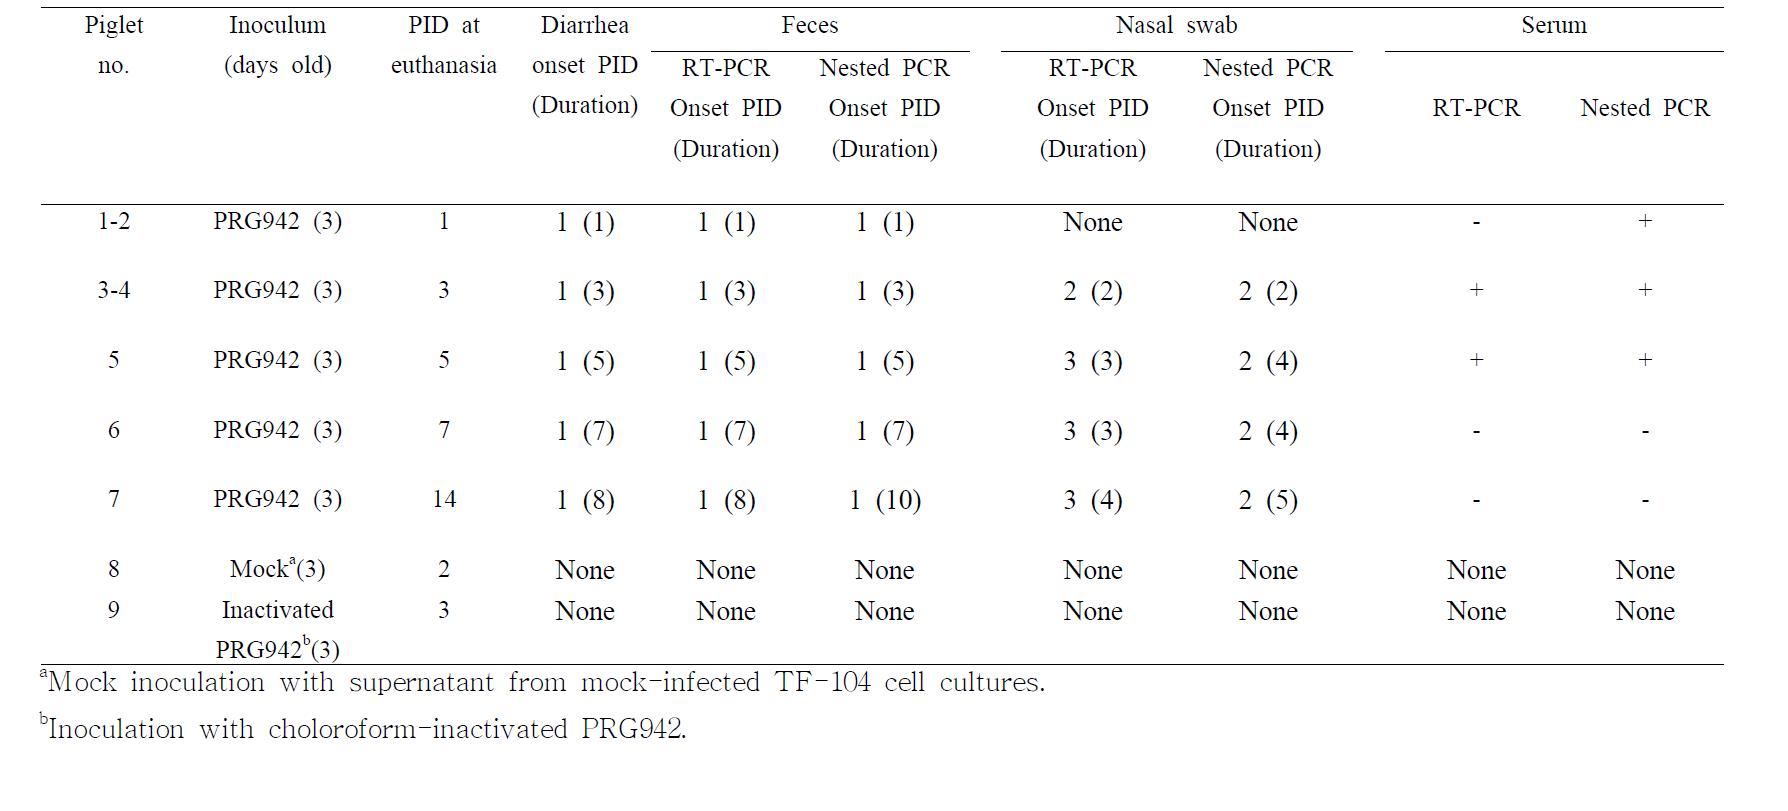 Summary of incidence of diarrhea, virus shedding via feces and nostrils, and viremia in colostrum-deprived piglets inoculated at three days of age with a G9P[23] (PRG942) RVA strain